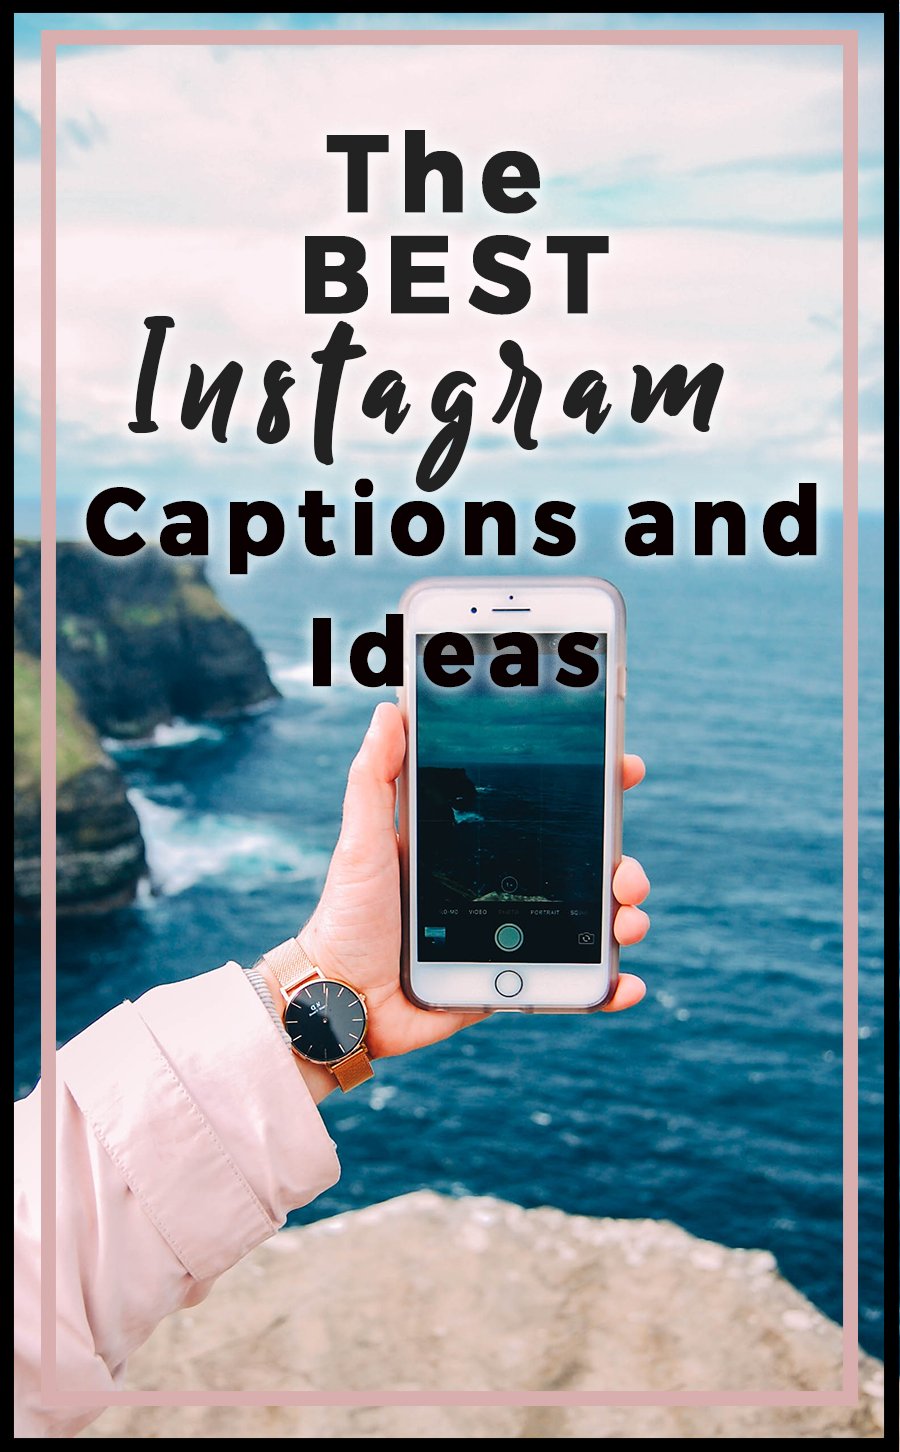 900+ Best Instagram Captions for your Photos | TechinReview